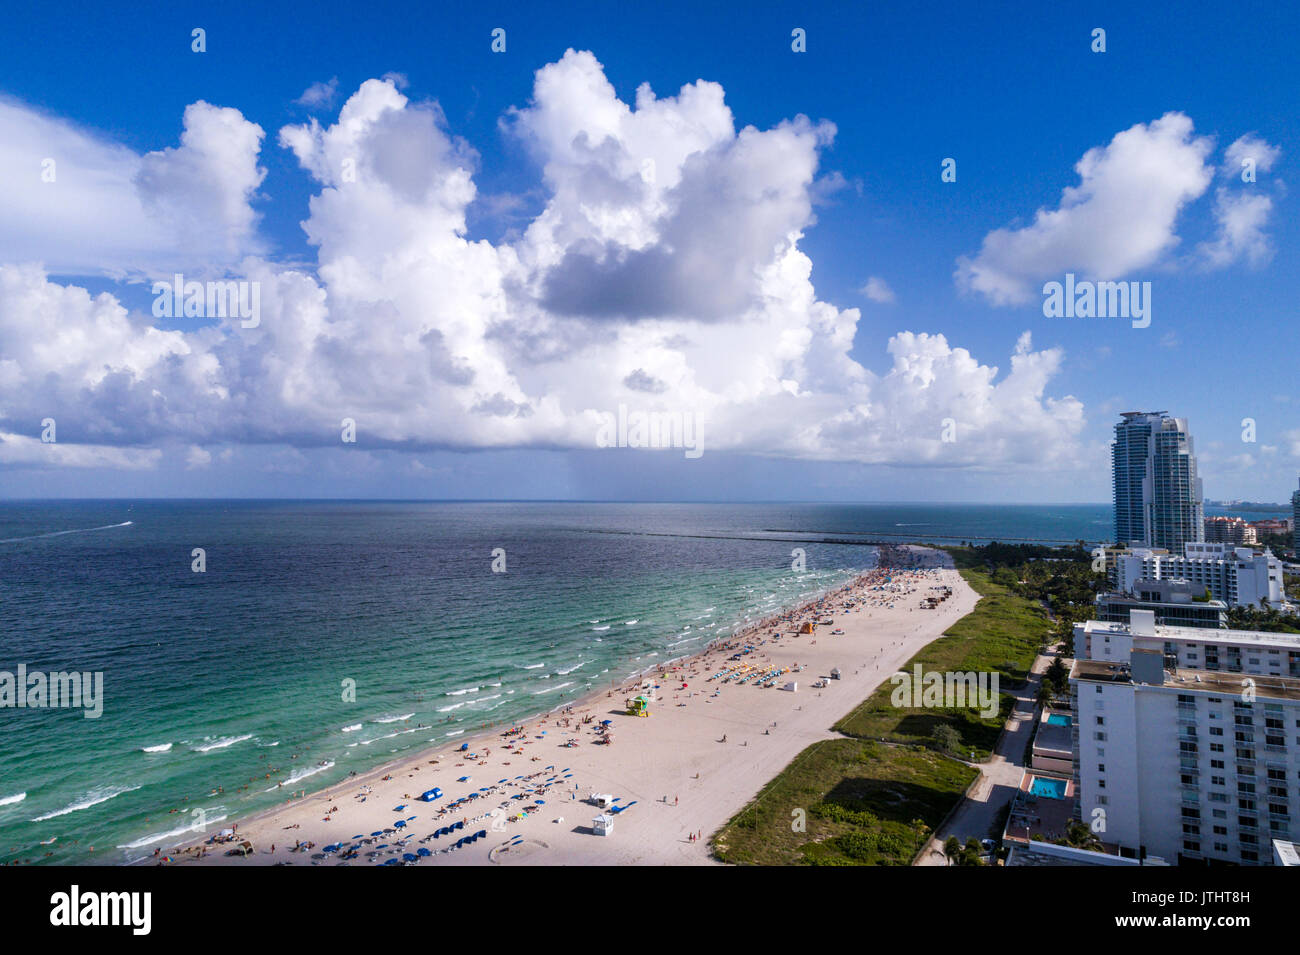 Miami Beach Florida,aerial overhead from above view,above,from above view,Atlantic Ocean,sand,sunbathers,FL17080611d Stock Photo